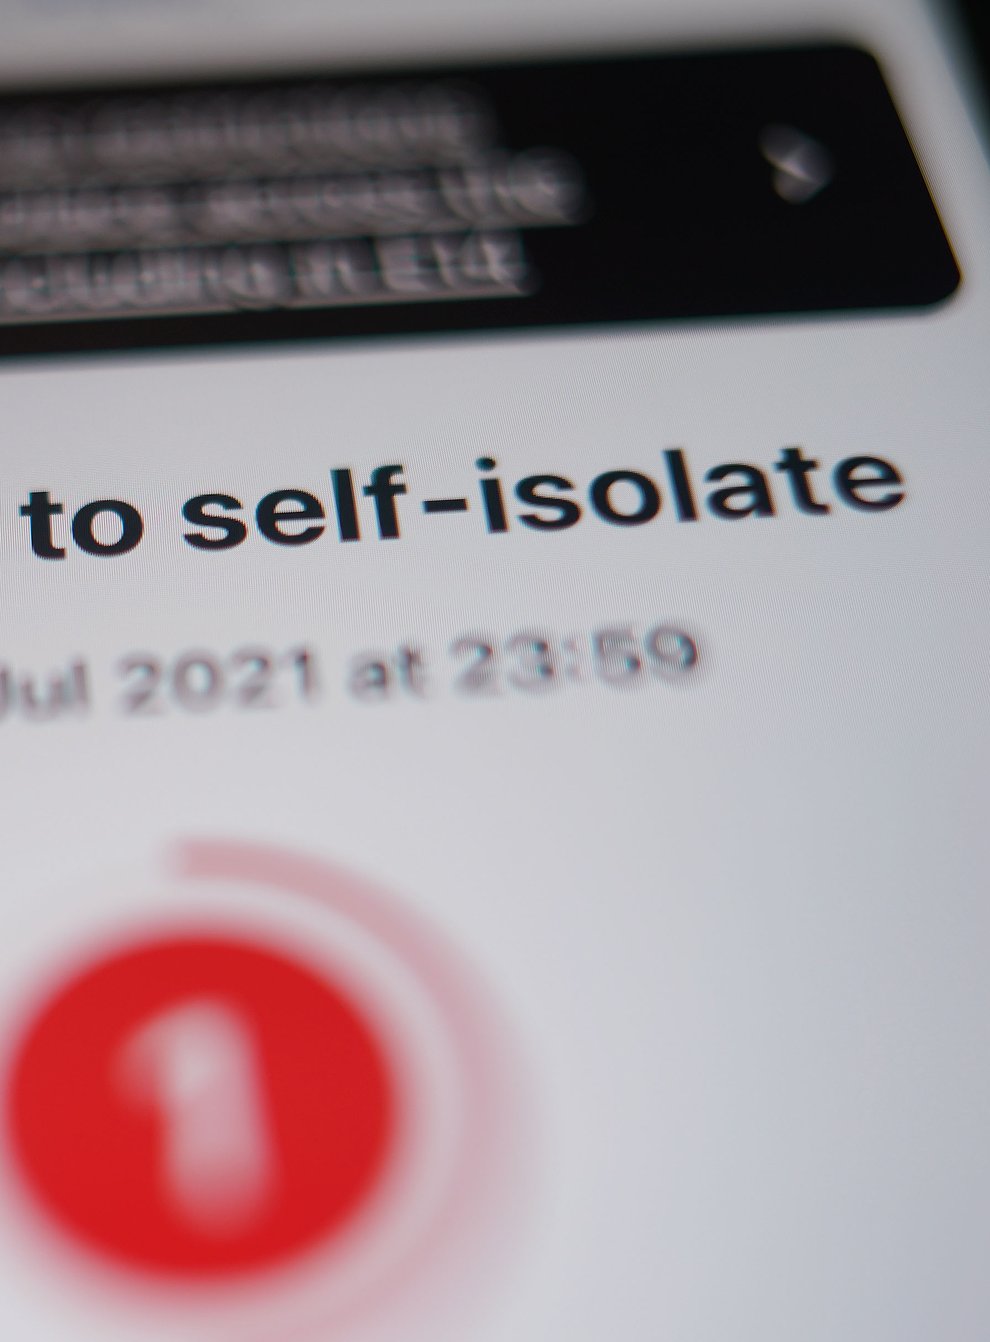 A message to self-isolate